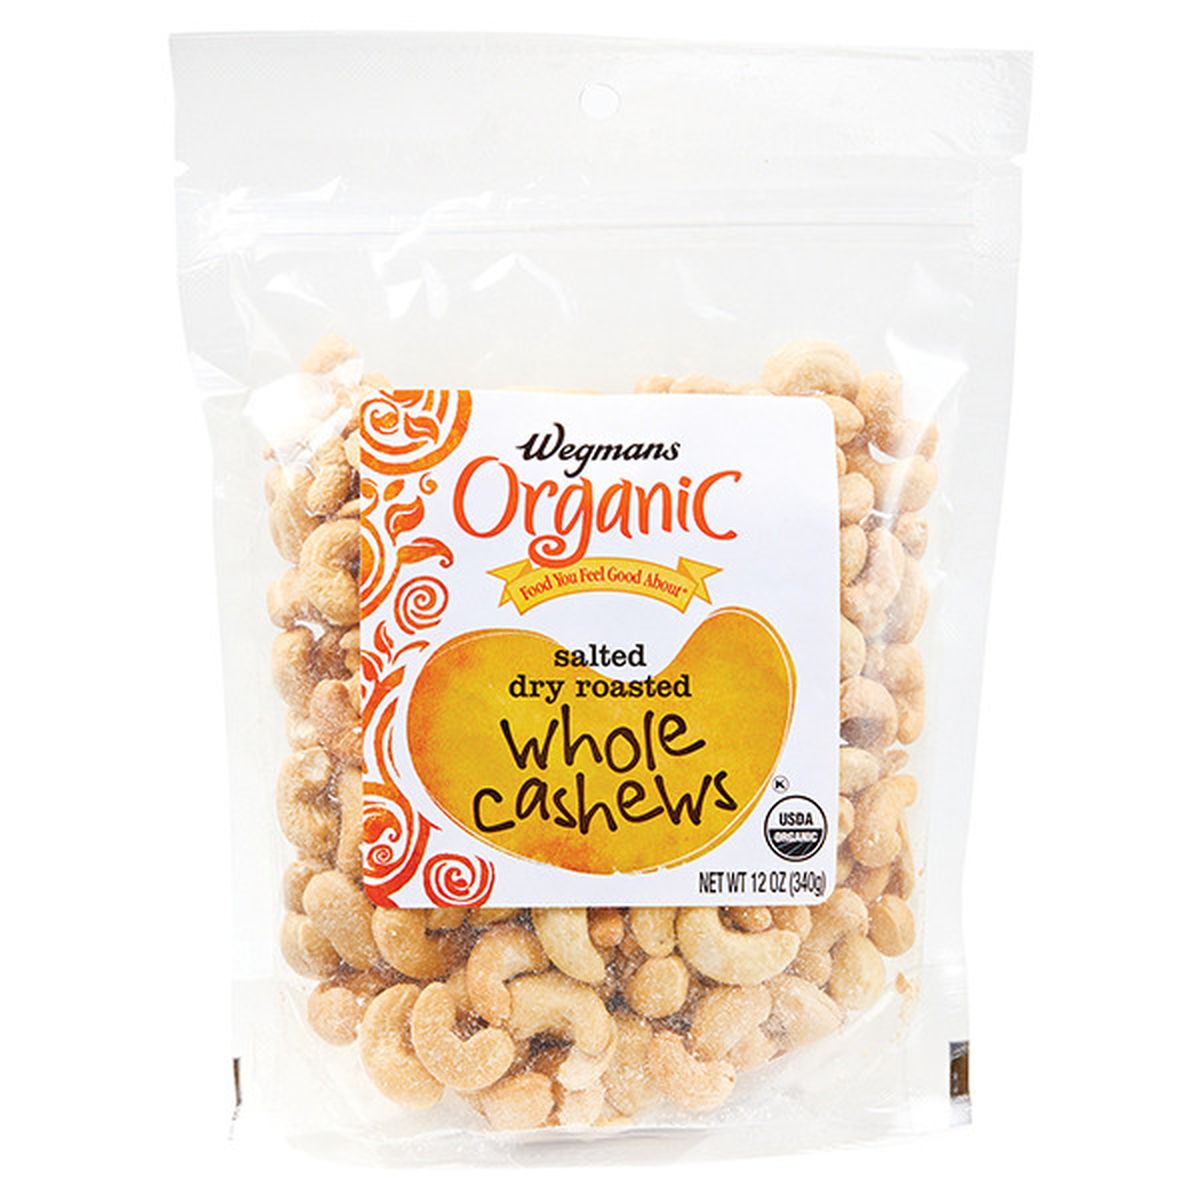 Calories in Wegmans Organic Salted Dry Roasted Whole Cashews